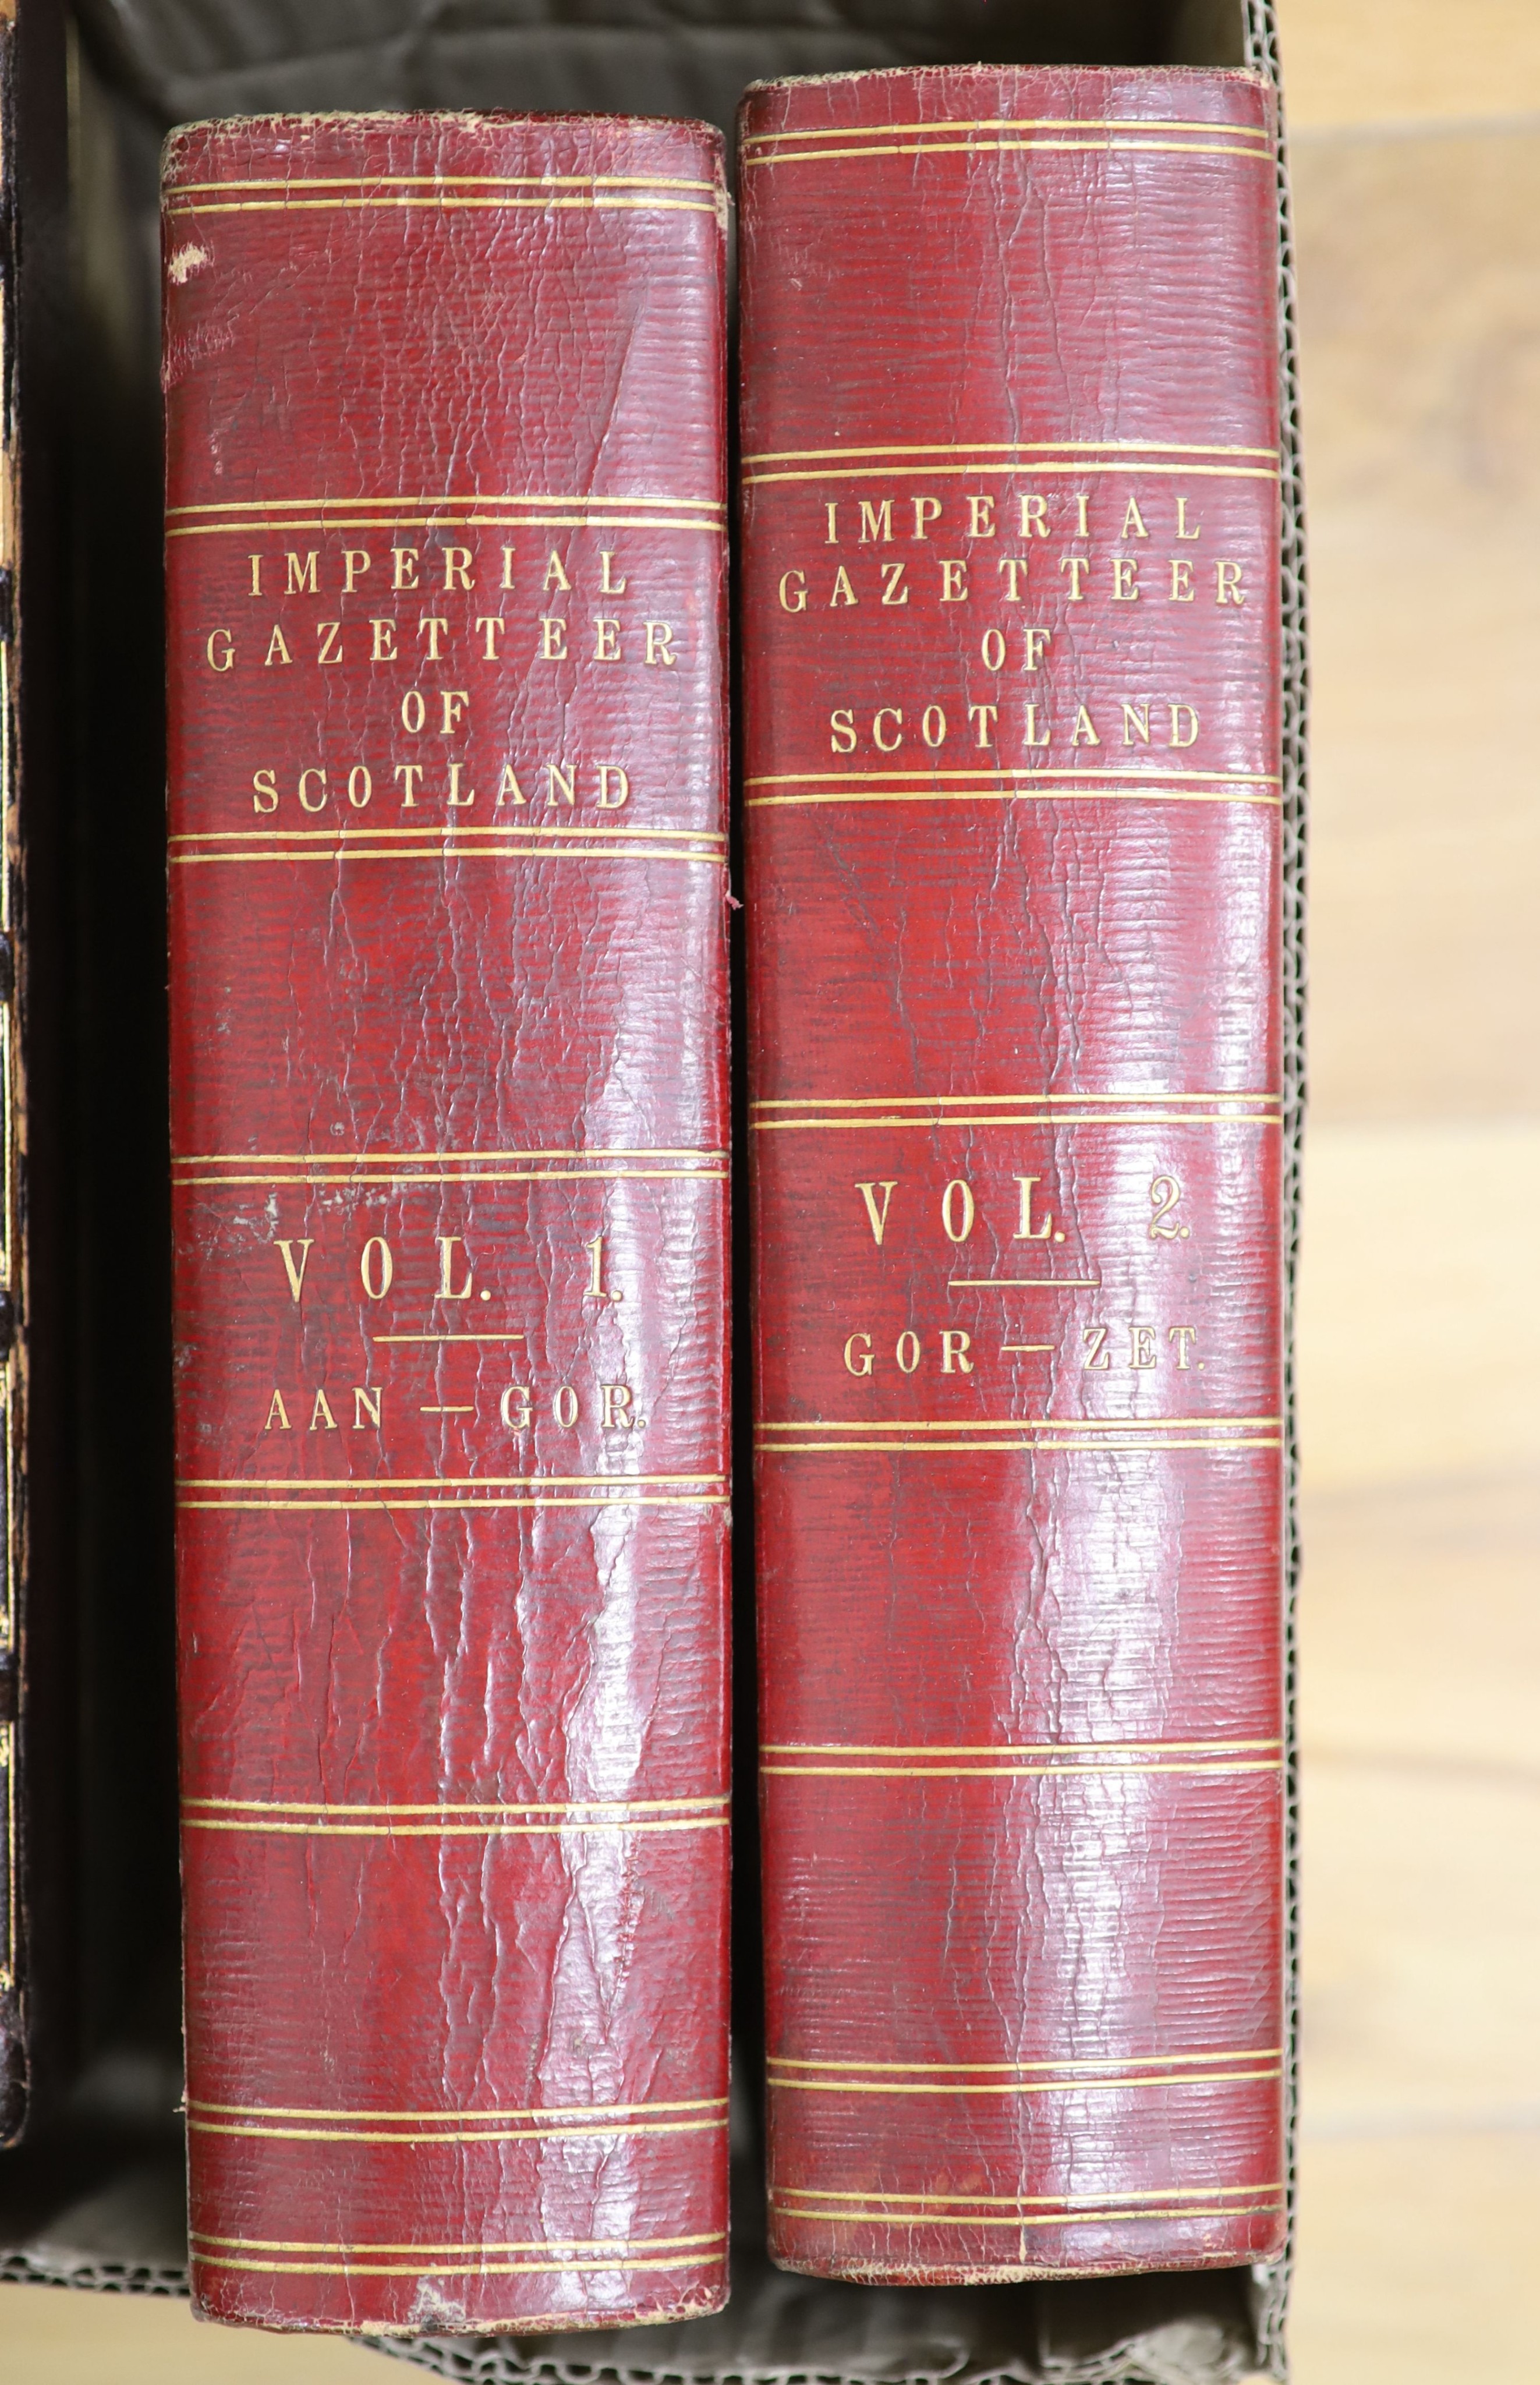 Wilson, The Rev. John Marius - The Imperial Gazetteer of Scotland; or Dictionary of Scottish Topography… 2 vols, each with an illustrated title page, complete with 58 illustrated plates (many are coloured and some double